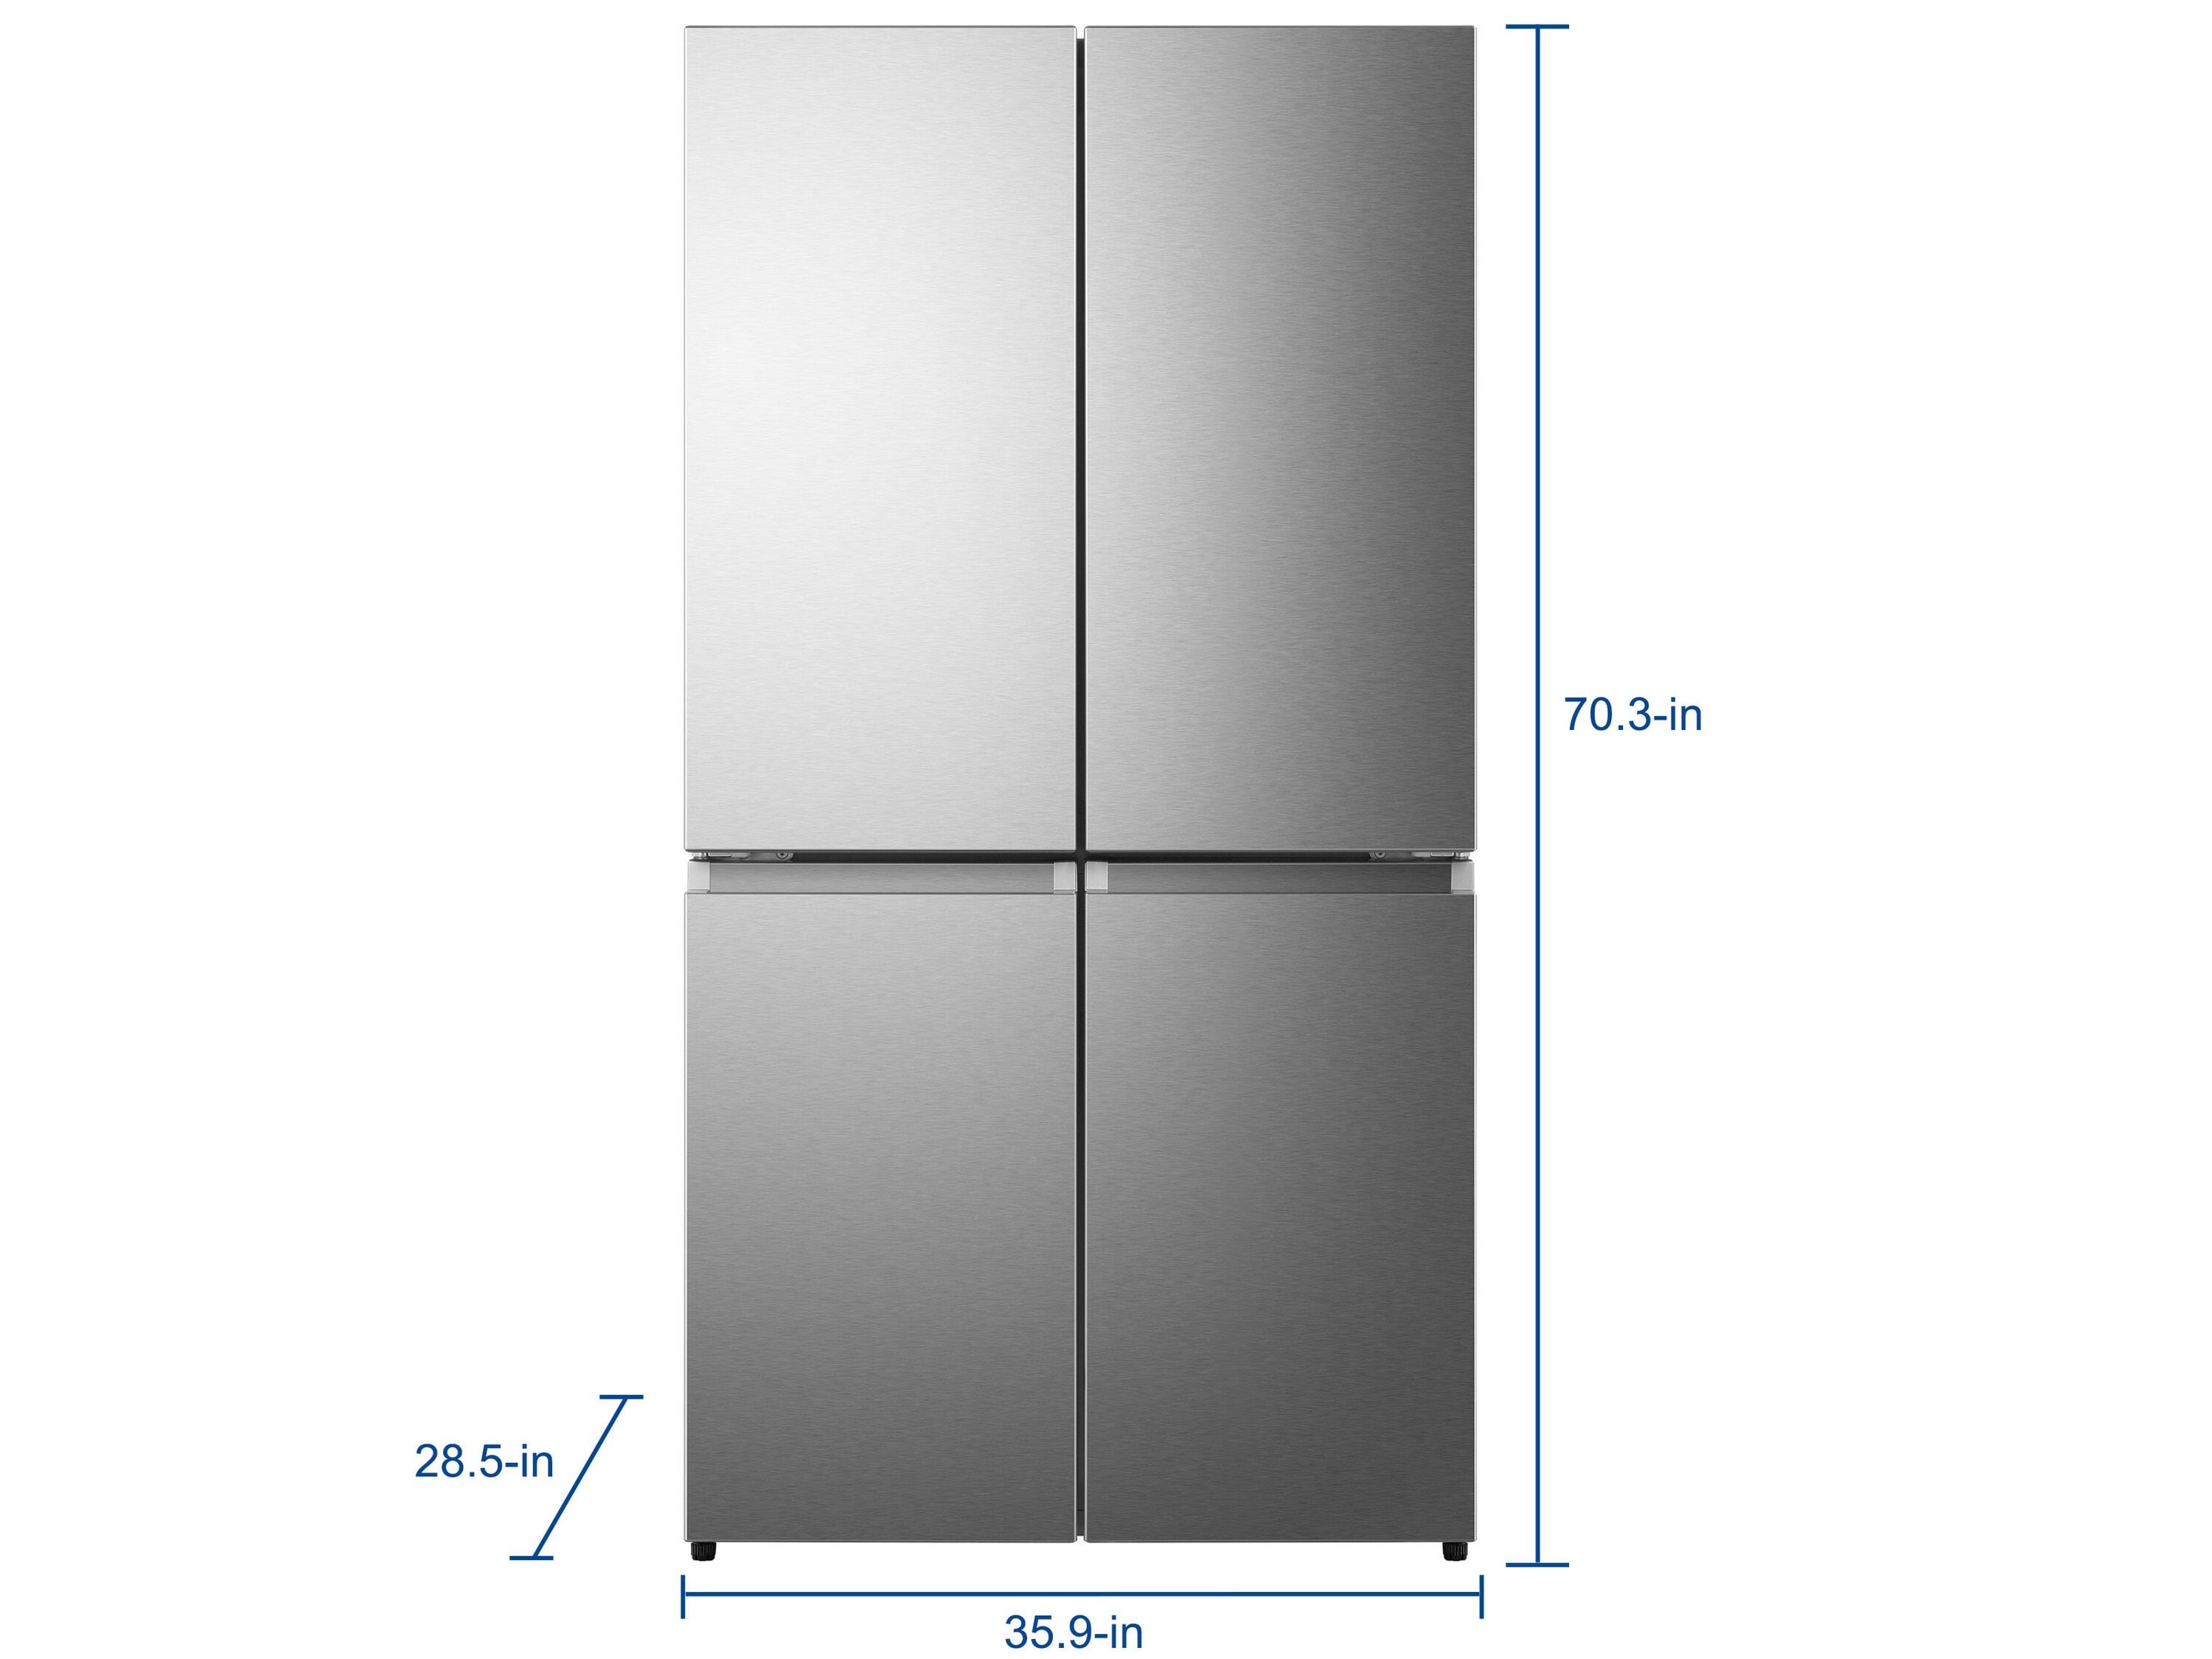 Hisense 21.6-cu ft 4-Door Counter-depth French Door Refrigerator with Ice  Maker (White) at